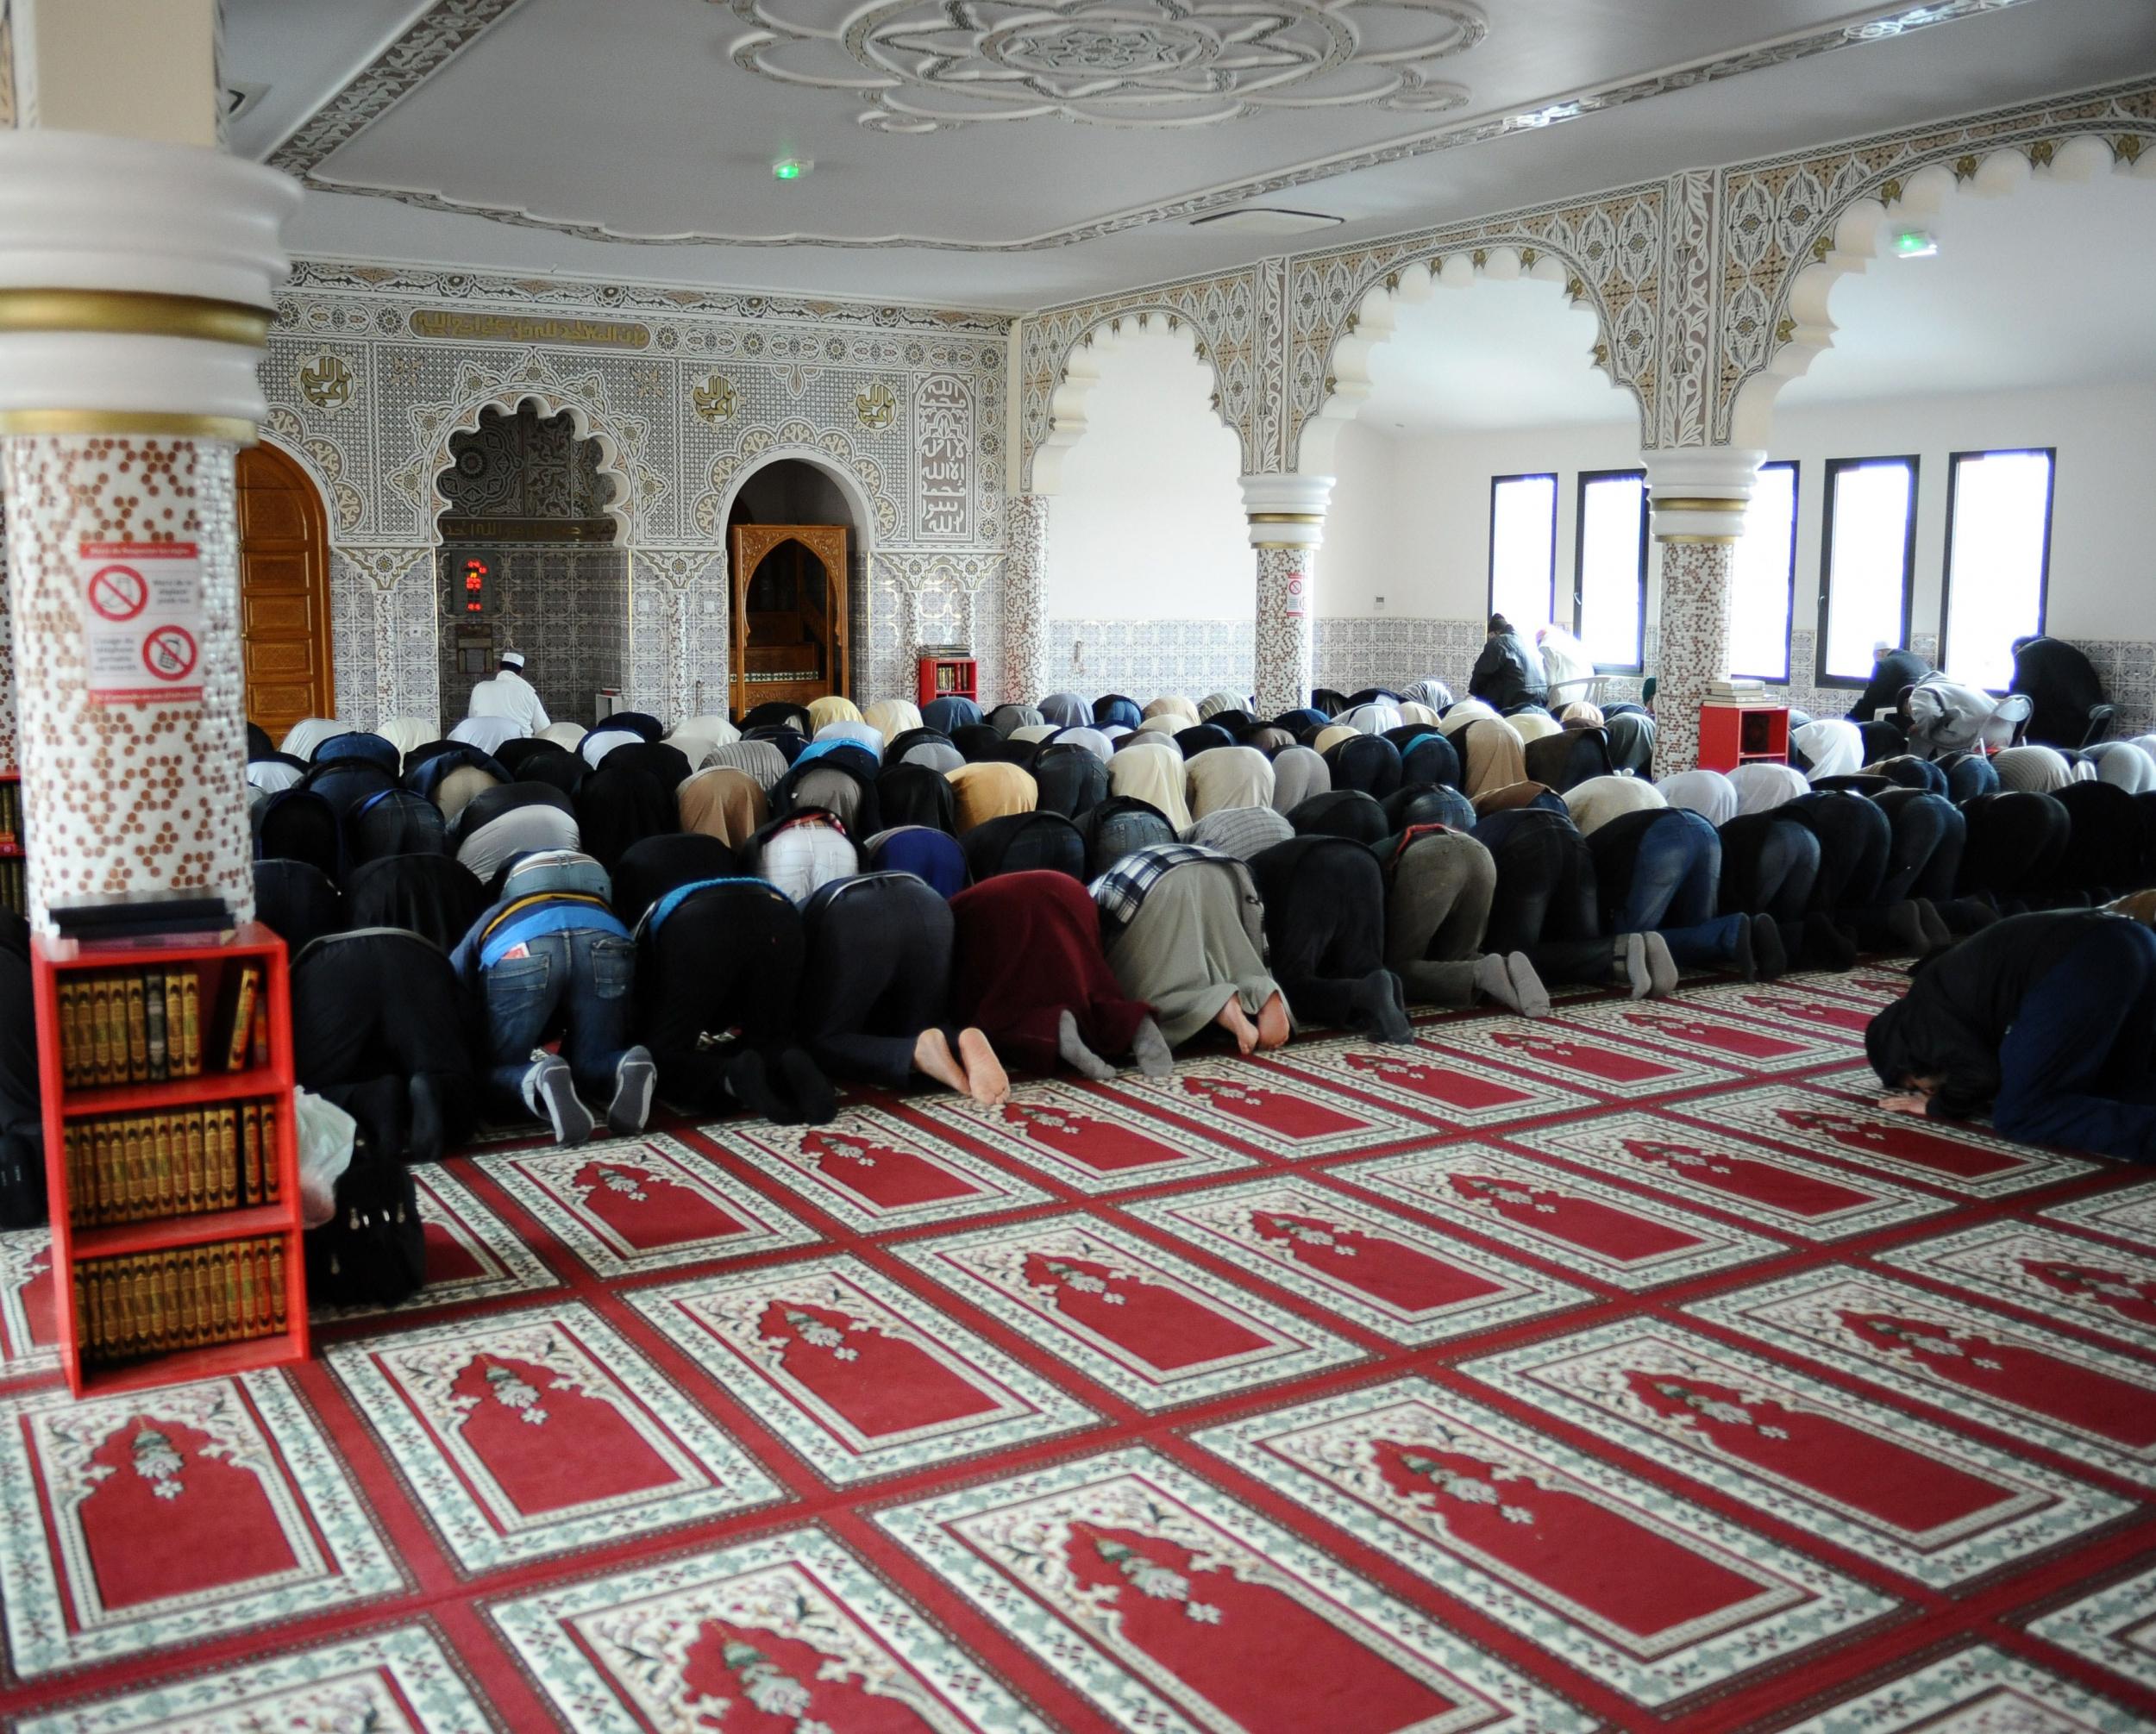 French Muslims will heard a condemnation of Isis' attacks at Friday prayers